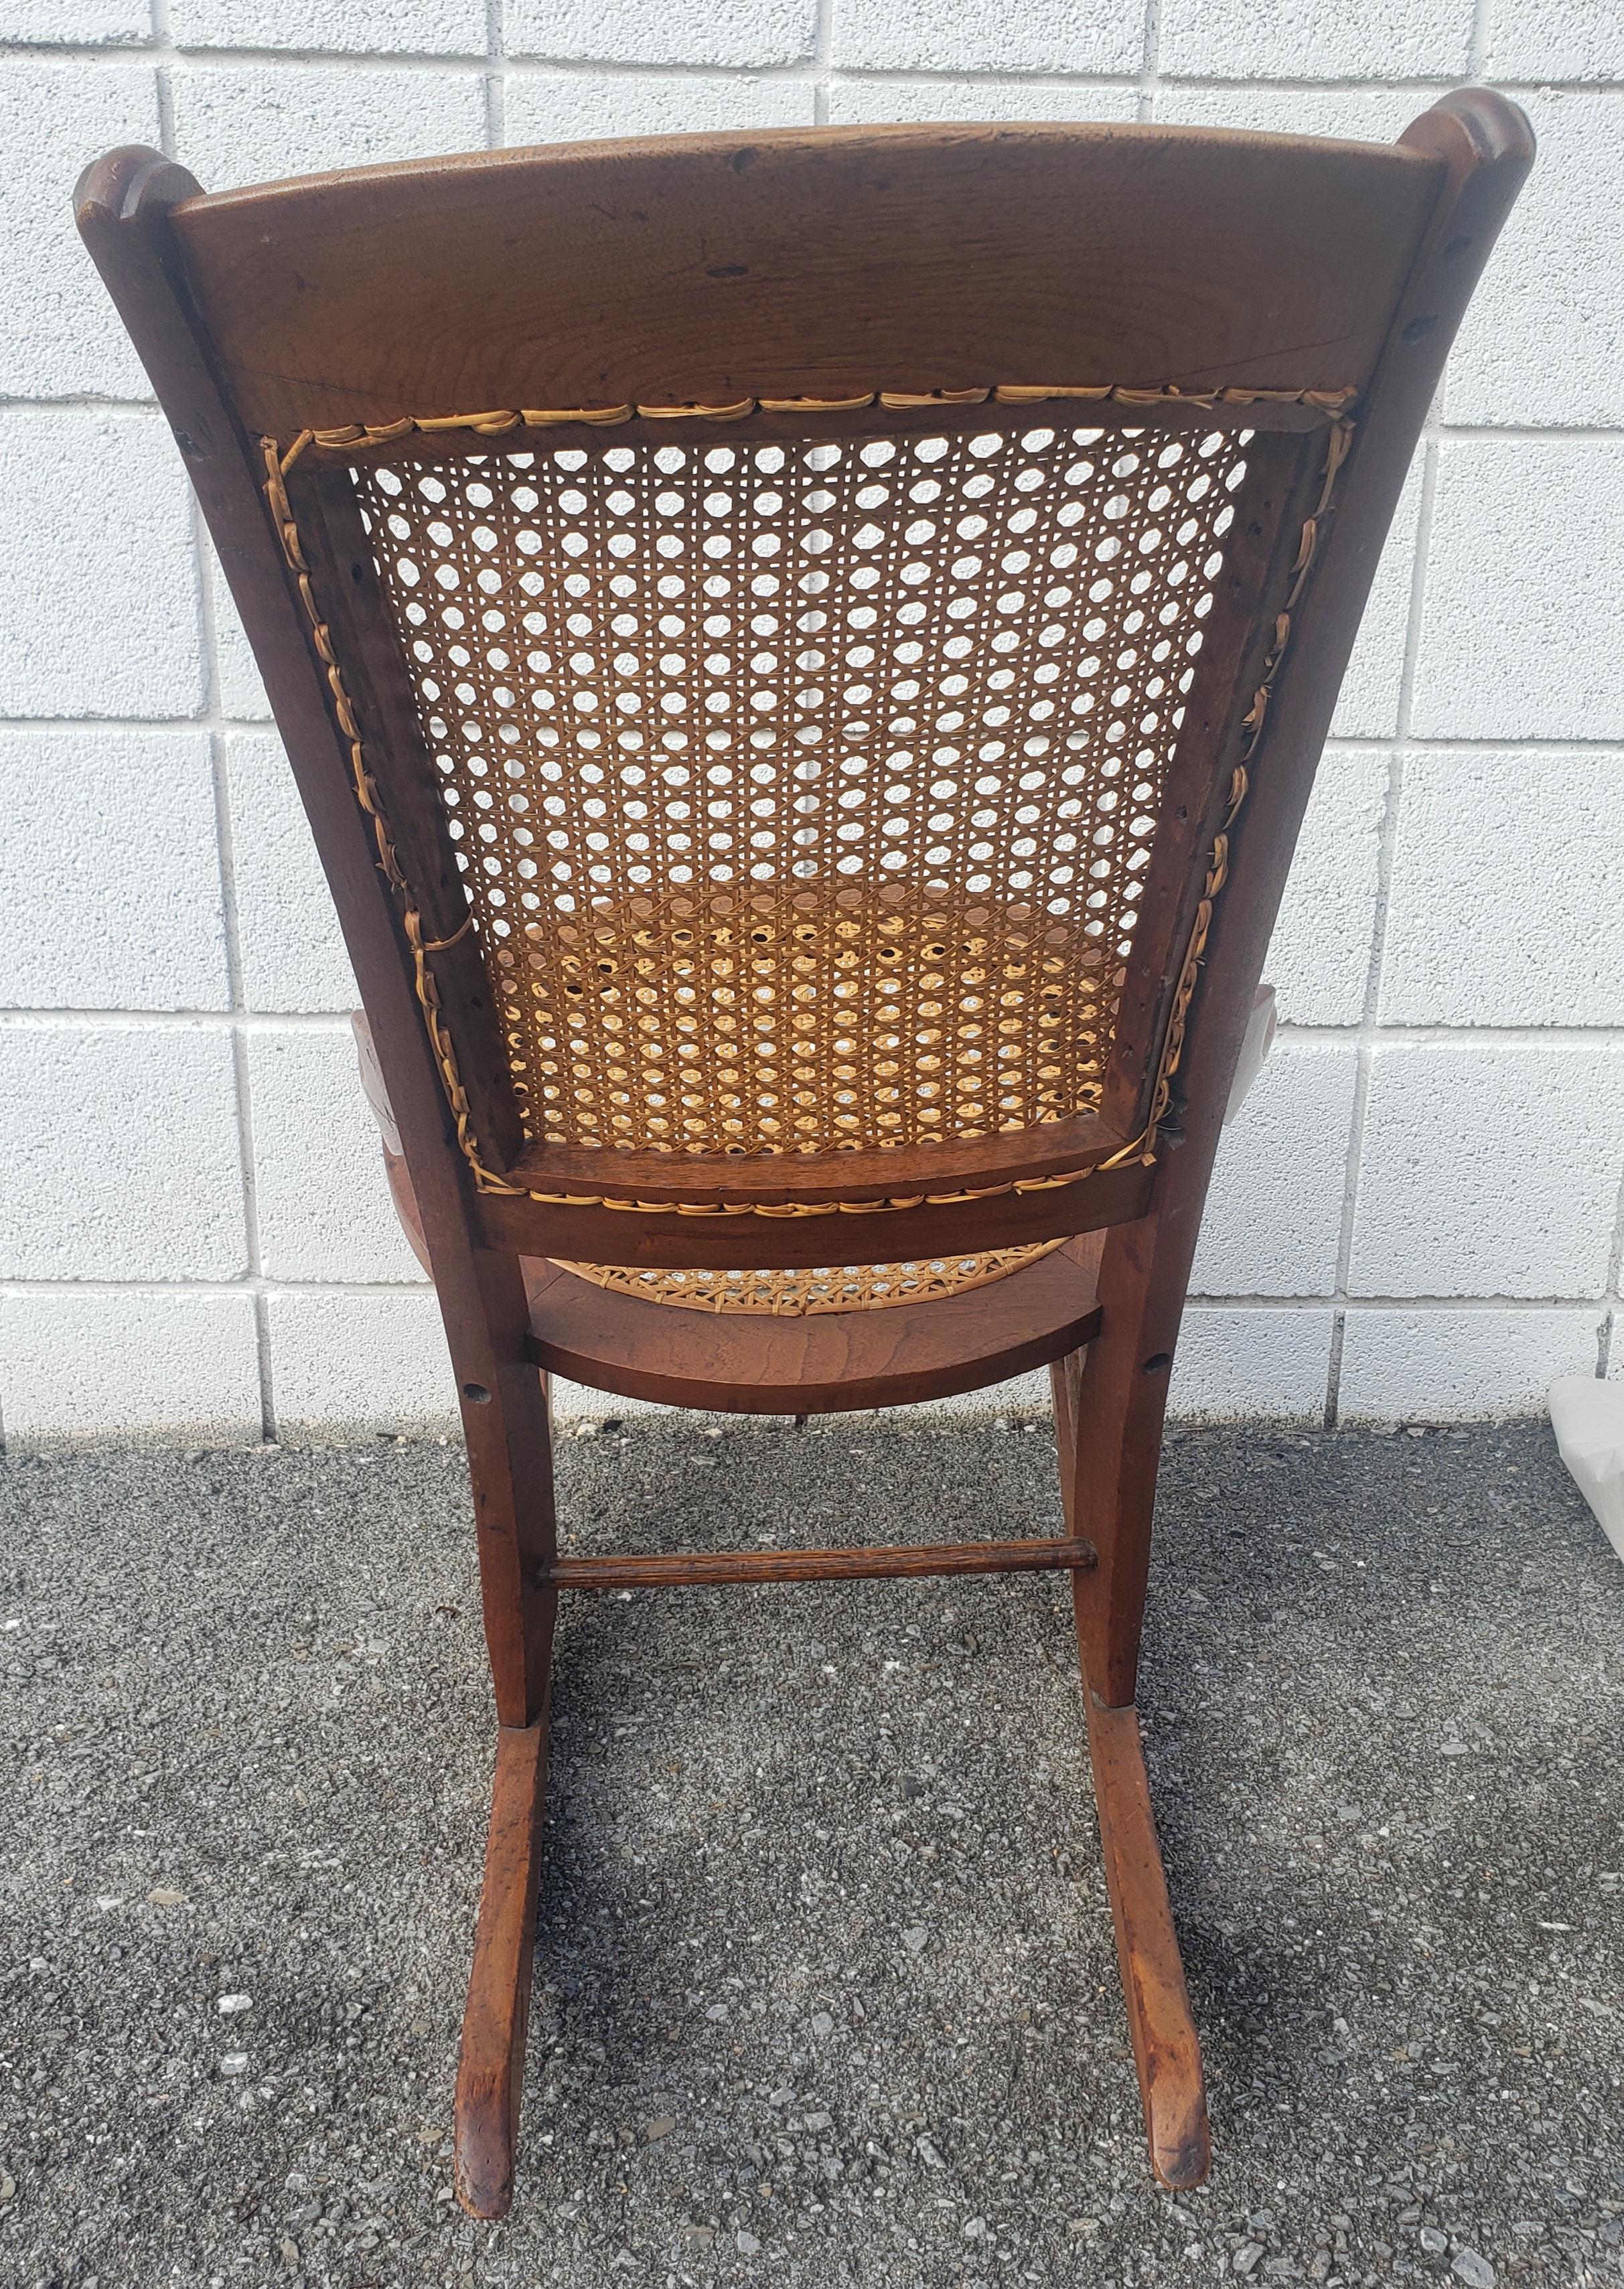 Victorian Walnut and Cane Seat Rocking Chair In Good Condition For Sale In Germantown, MD